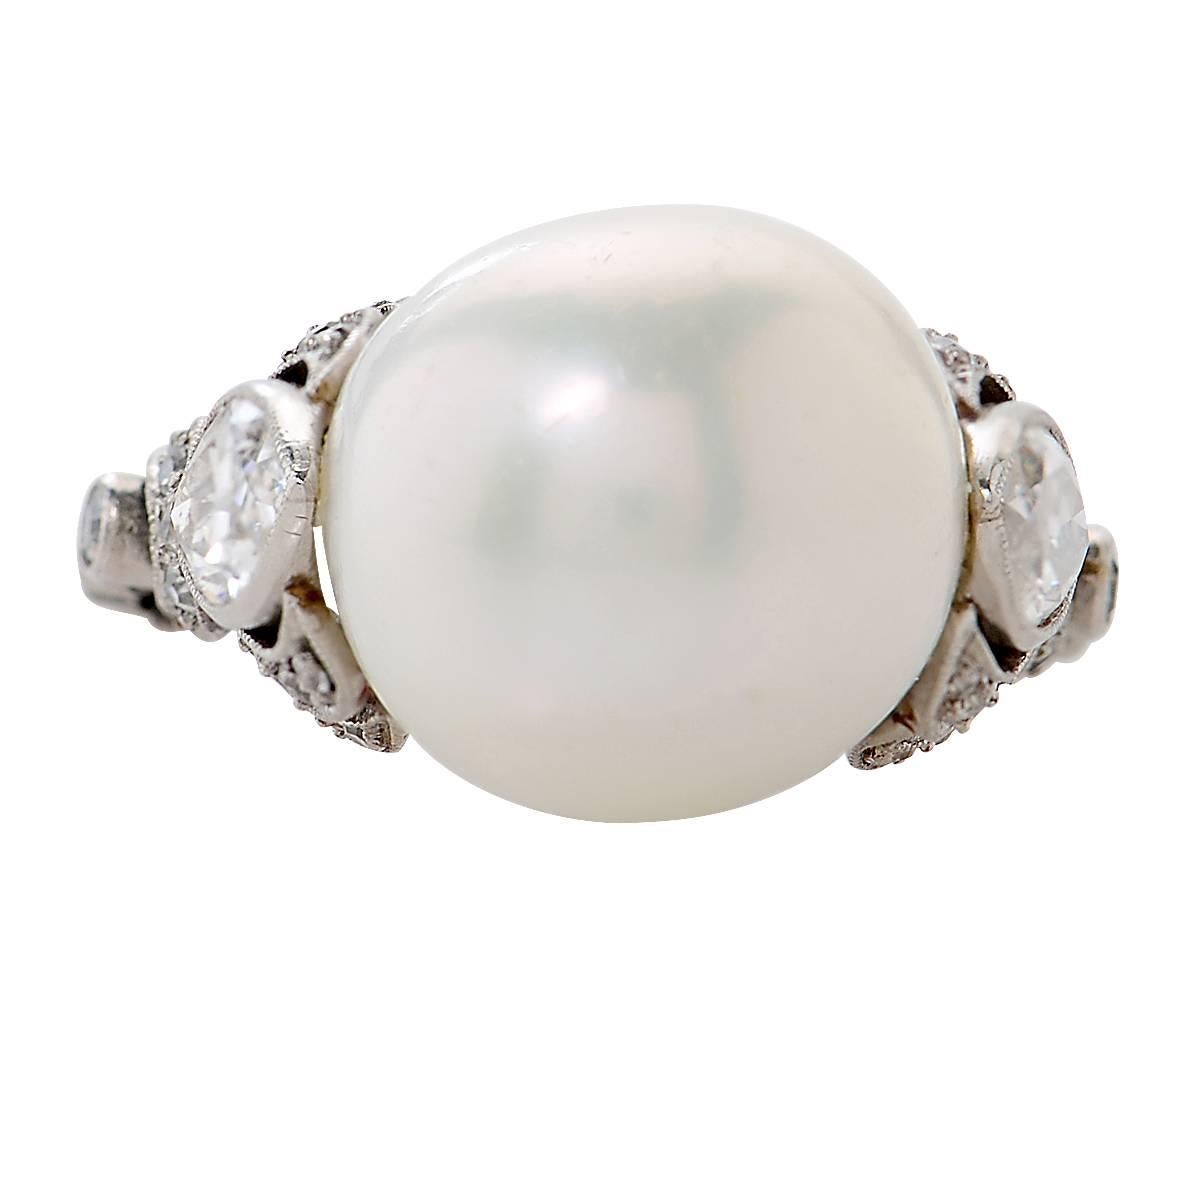 Platinum Art Deco Ring Containing a GIA Graded 11.88mm Freshwater Natural Pearl Flanked by 2 Navette Shape Diamonds Weighing Approximately .70 Carats and Accented by 37 Old European Cut Diamonds Weighing Approximately .30 Carats. Ring Size is 6.5.